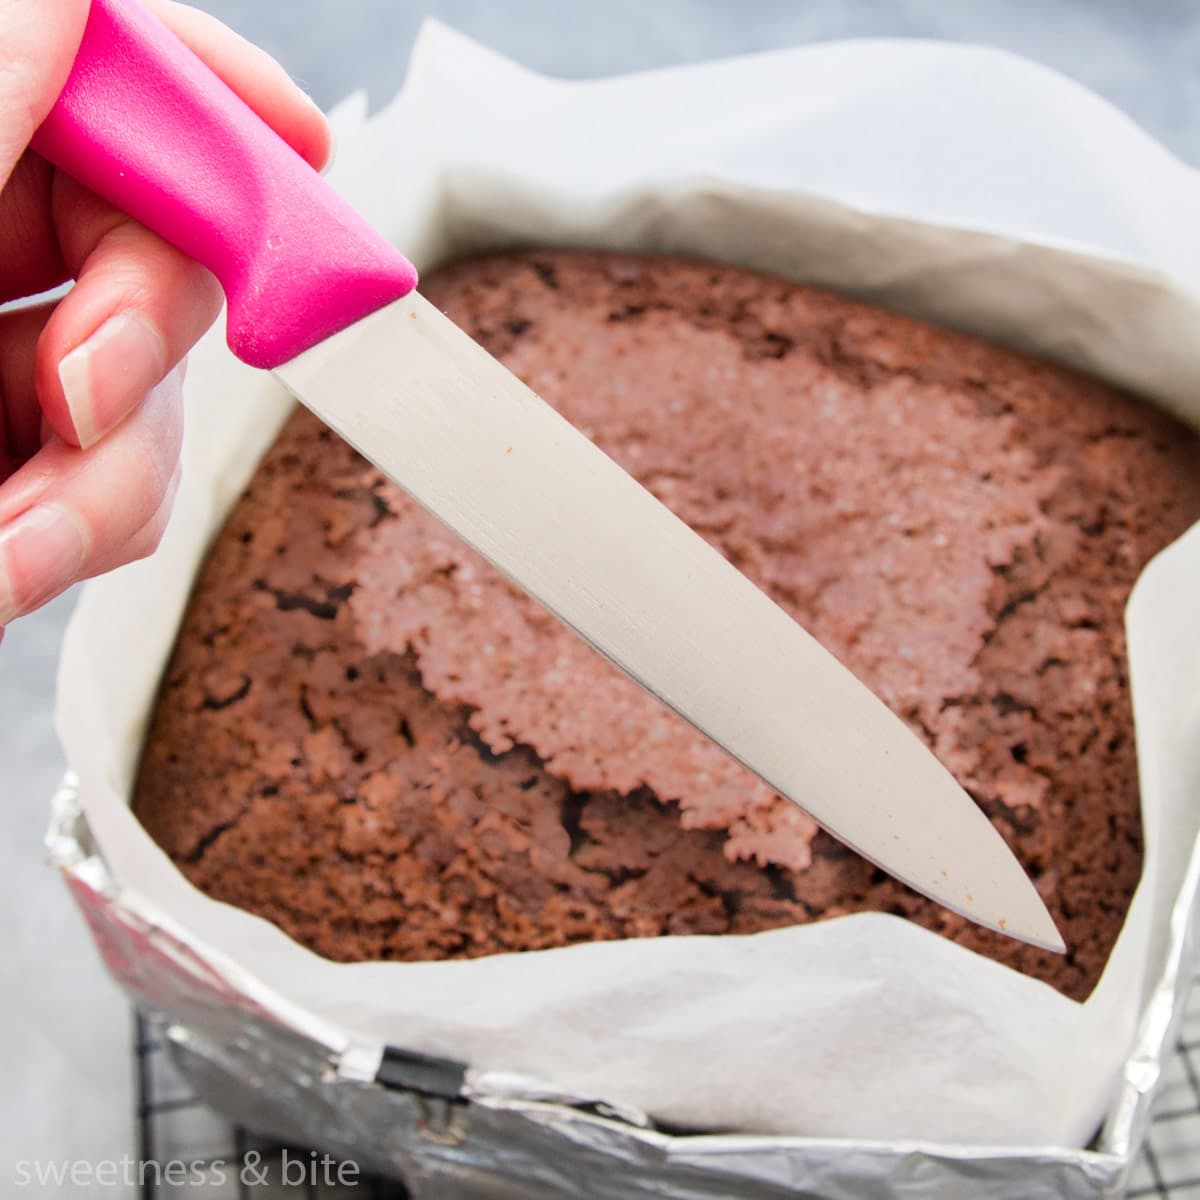 A knife being used to check whether a chocolate cake is done.